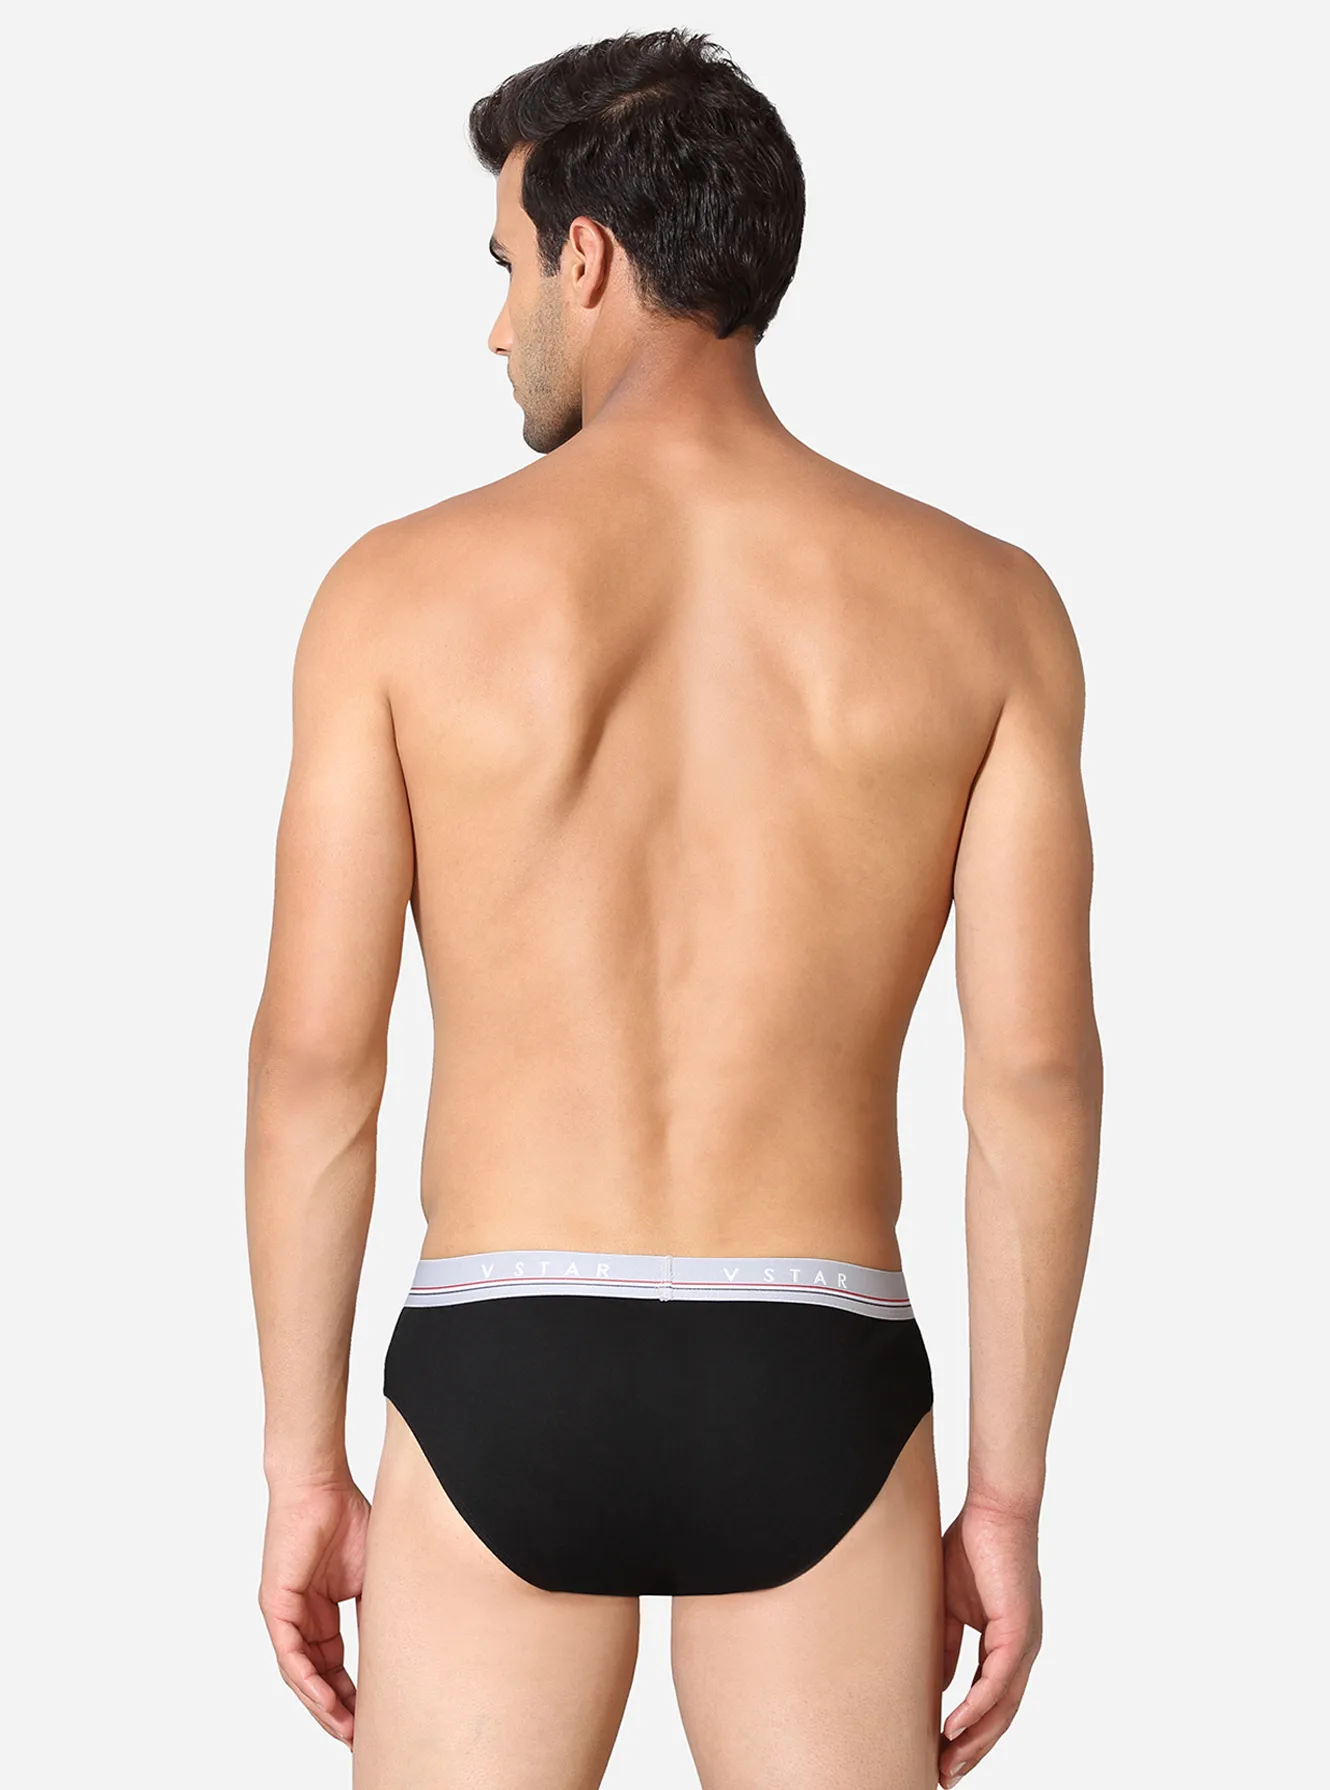 Premium cotton low rise brief with outer elastic waistband - Pack of 2, Buy Mens & Kids Innerwear